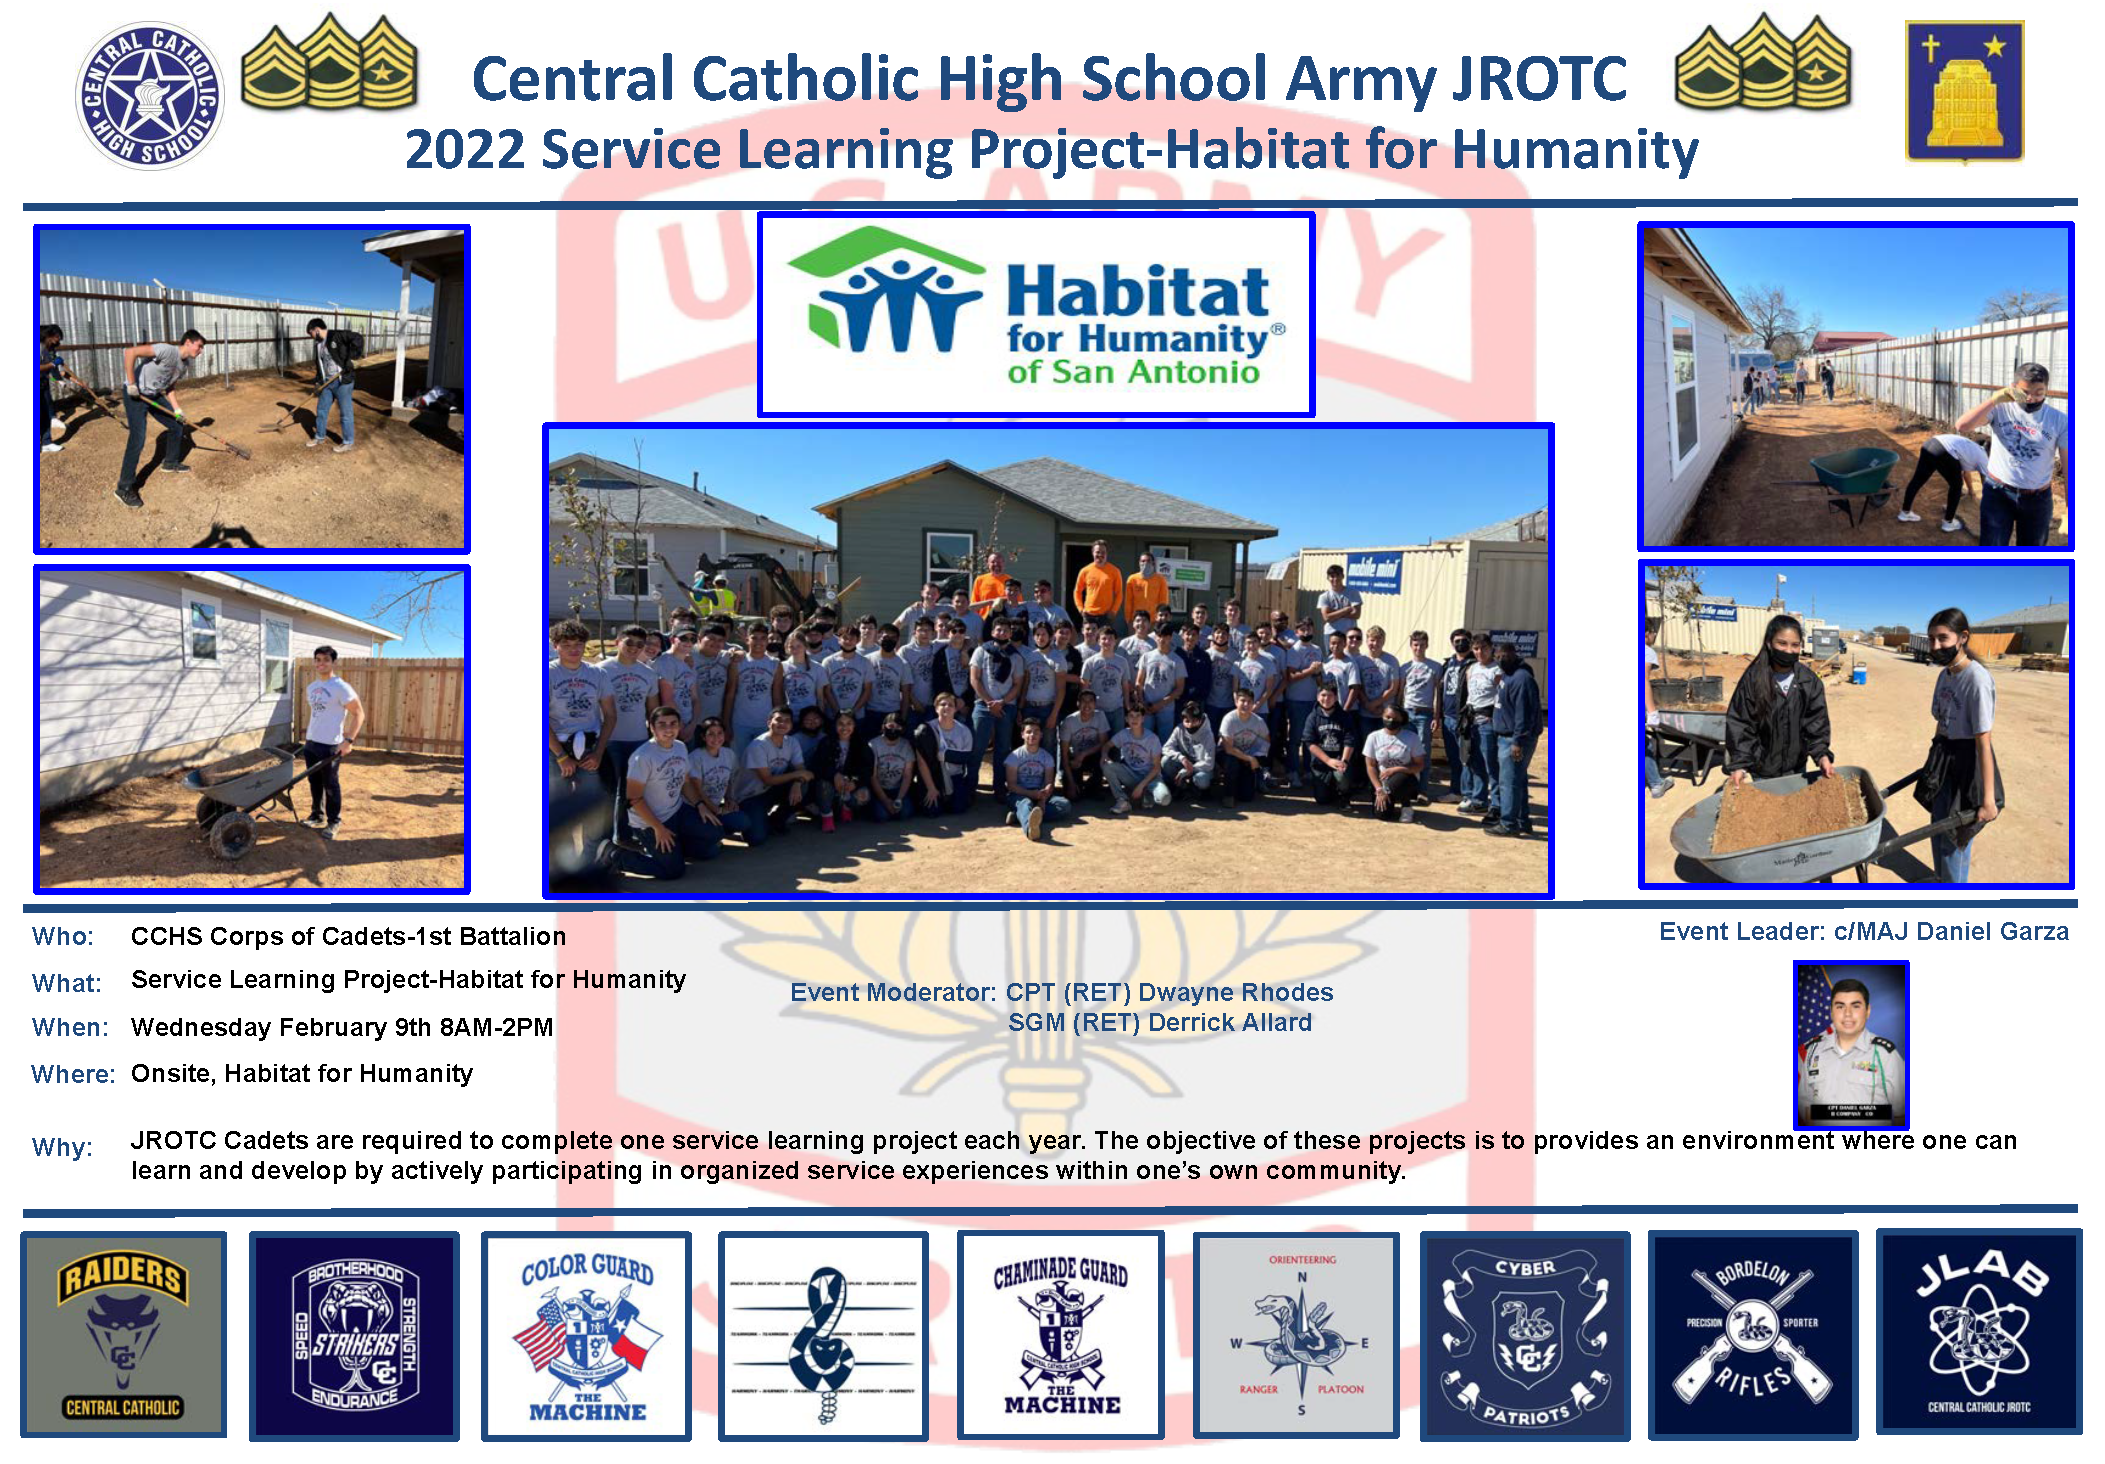 2022 Service Learning Project - Habitat for Humanity